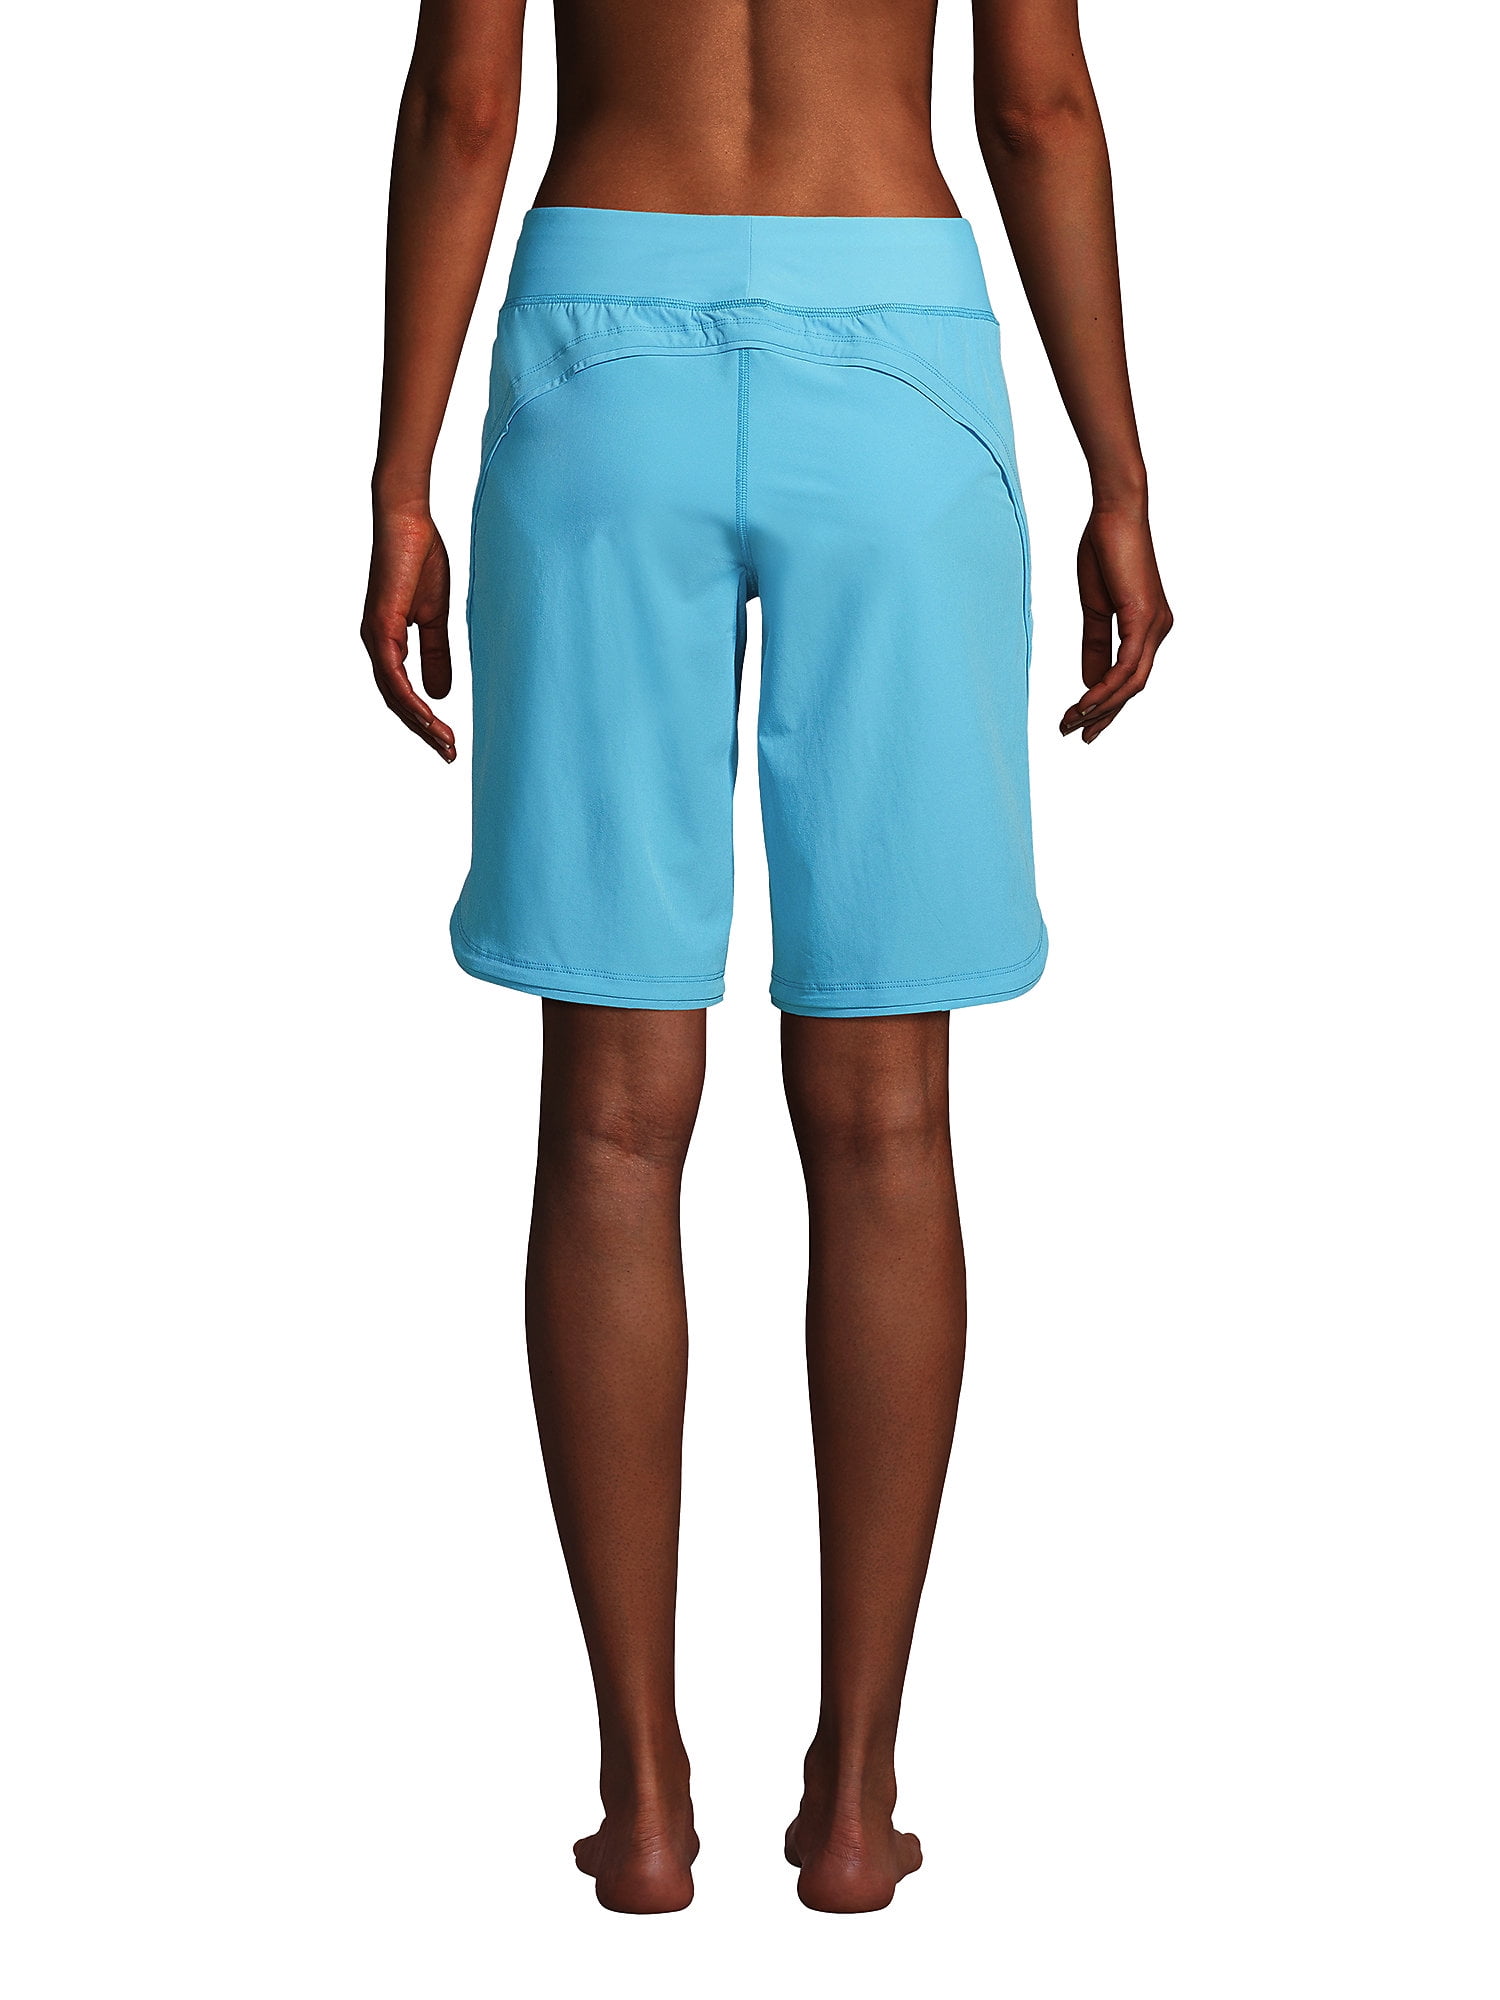 Lands' End Women's 3 Quick Dry Swim Shorts with Panty - 14 - Turquoise